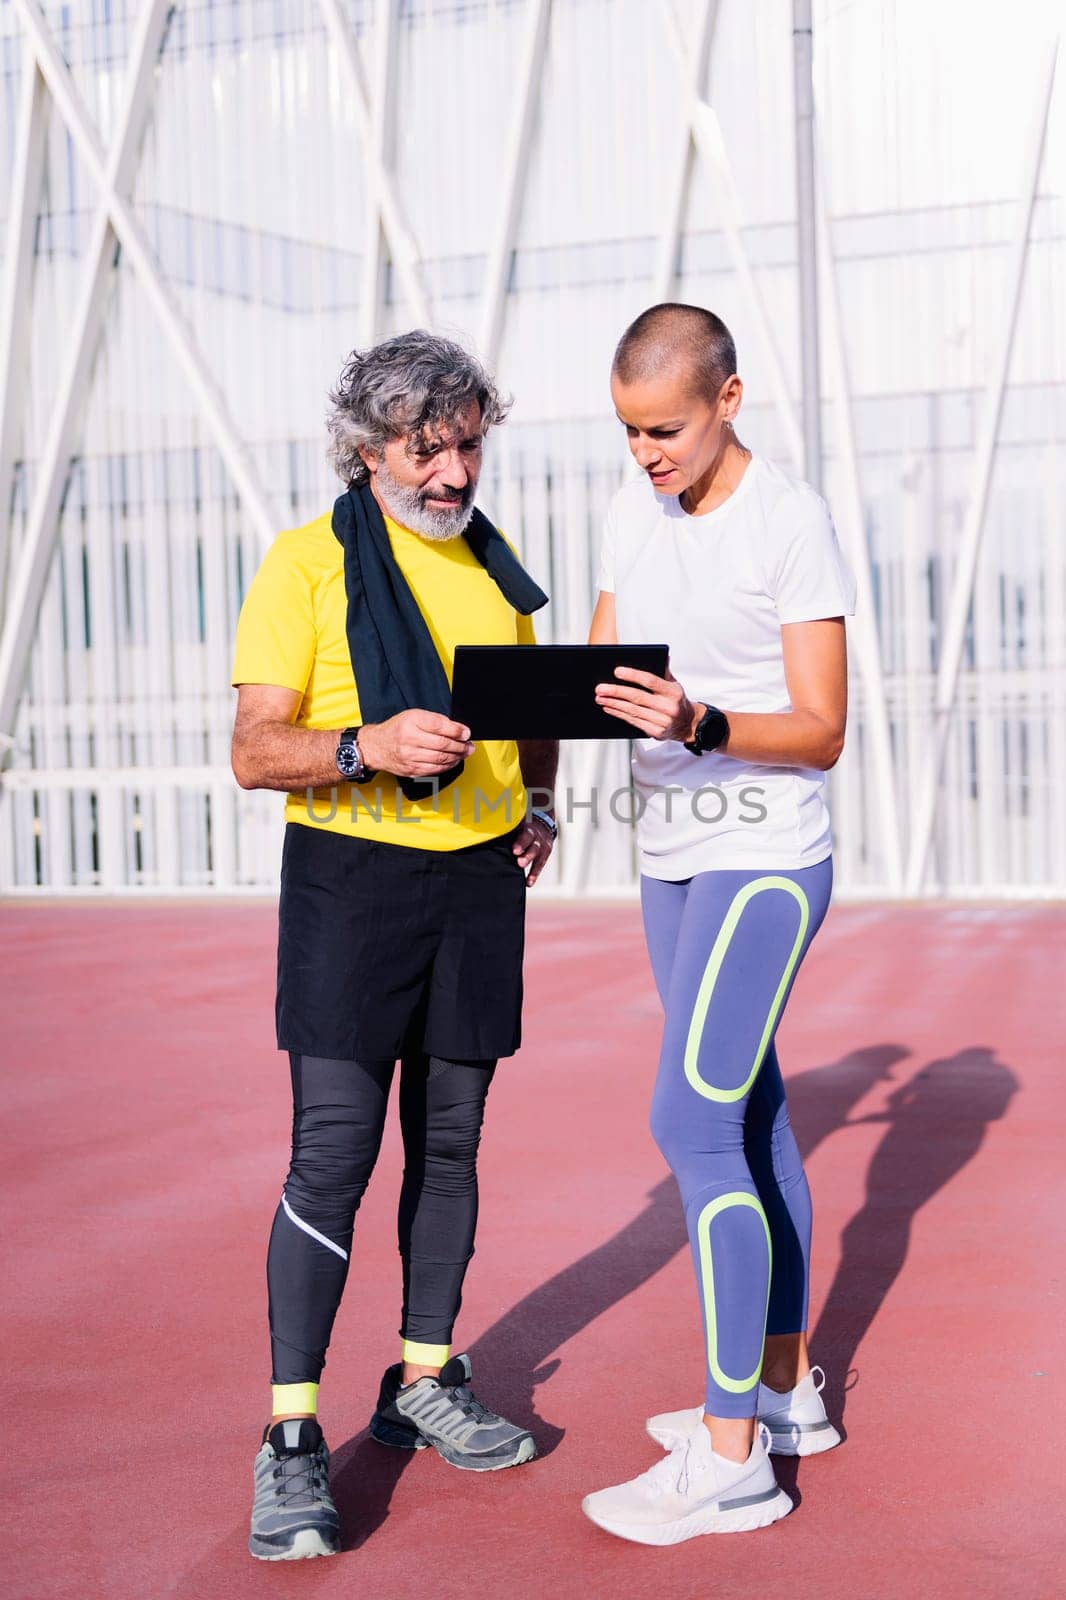 senior sports man planning workout on a tablet with female personal trainer, concept of healthy and active lifestyle in middle age